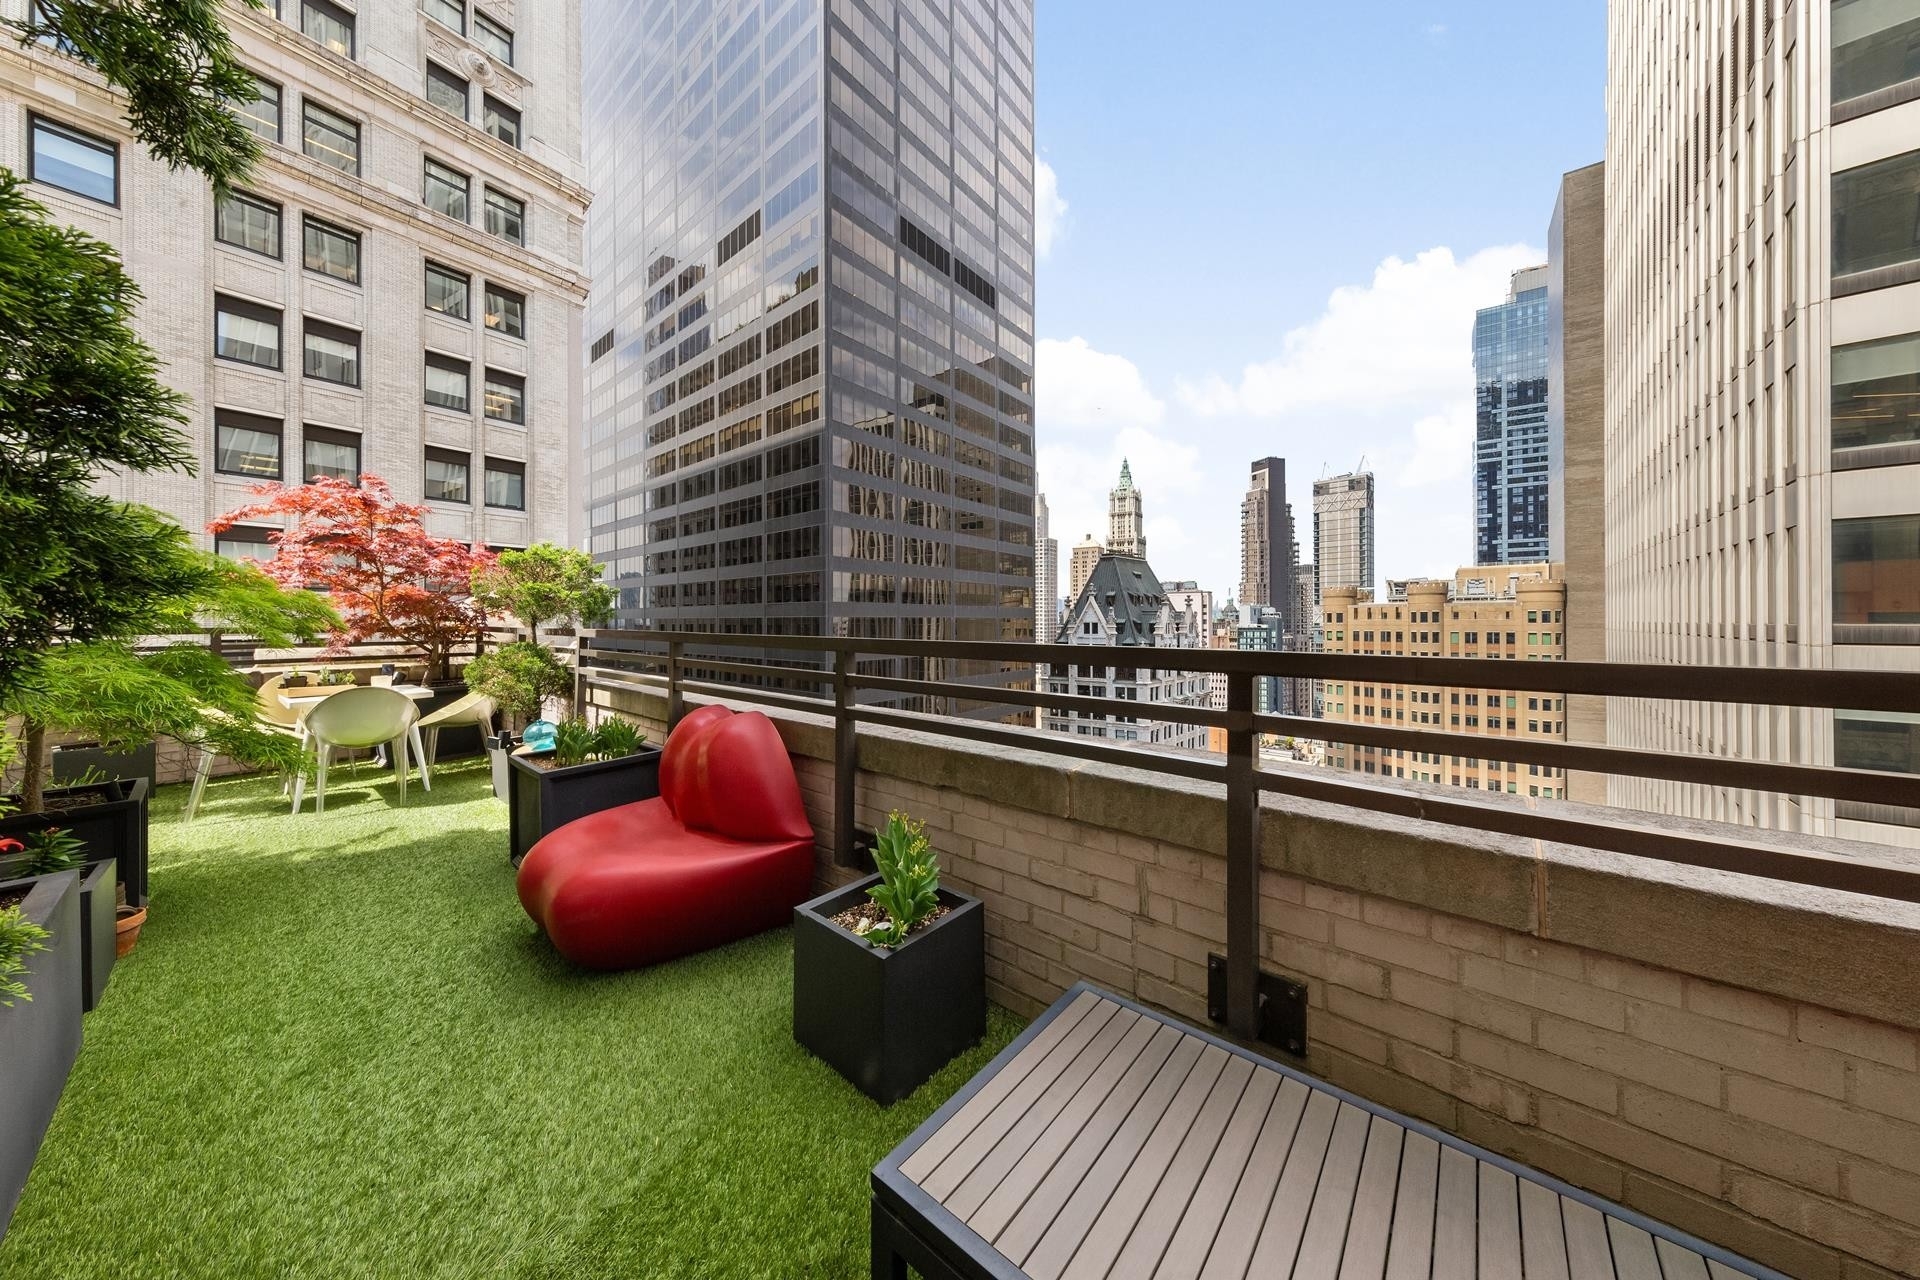 Condominium for Sale at The Collection, 20 PINE ST, 3002 Financial District, New York, New York 10005